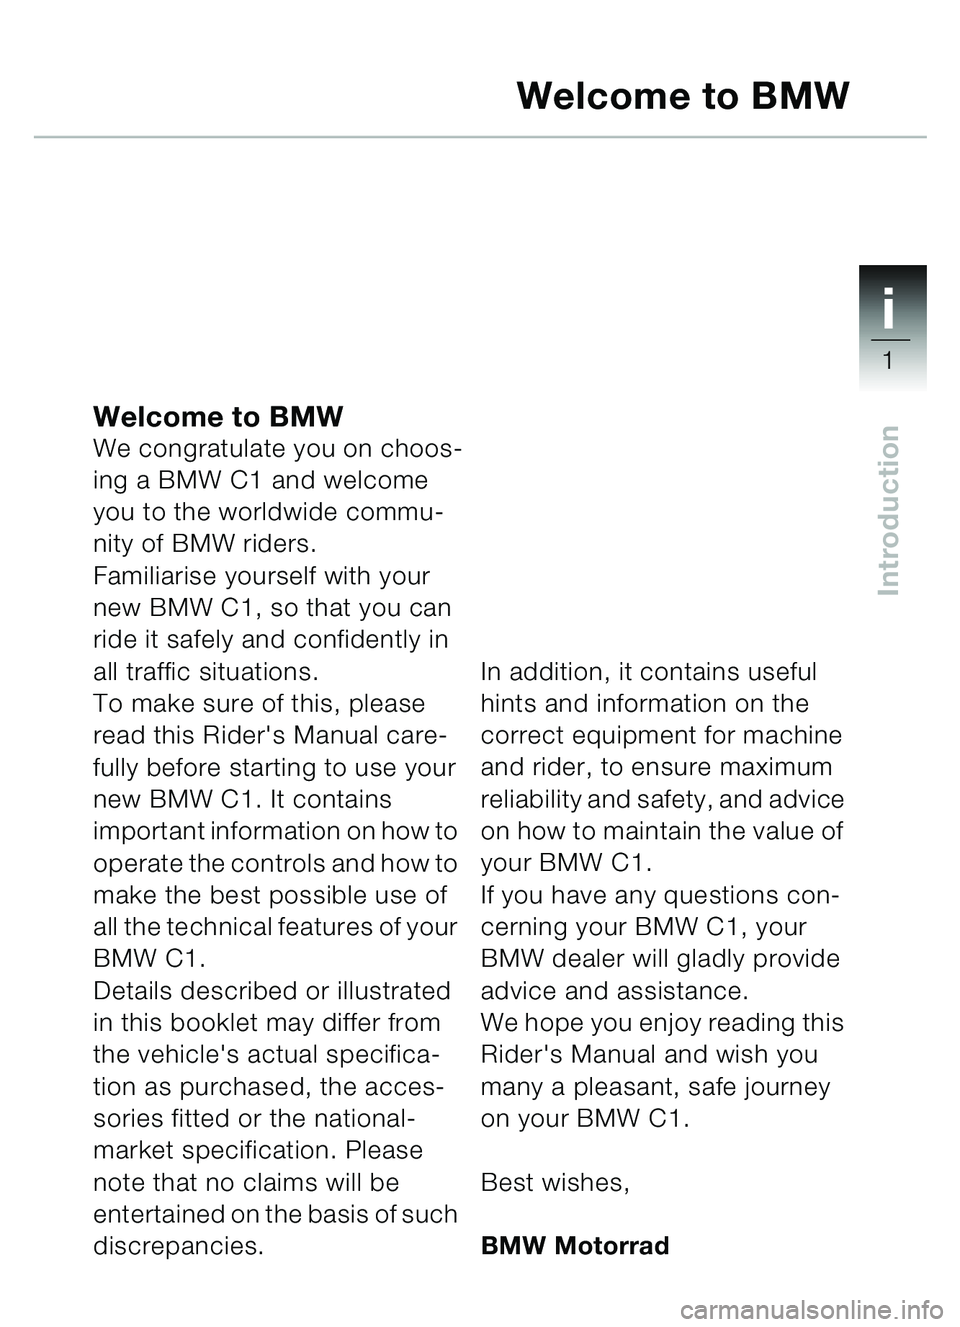 BMW MOTORRAD C1 2000  Riders Manual (in English) 1i
1
Introduction
Welcome to BMWWe congratulate you on choos-
ing a BMW C1 and welcome 
you to the worldwide commu-
nity of BMW riders.
Familiarise yourself with your 
new BMW C1, so that you can 
rid